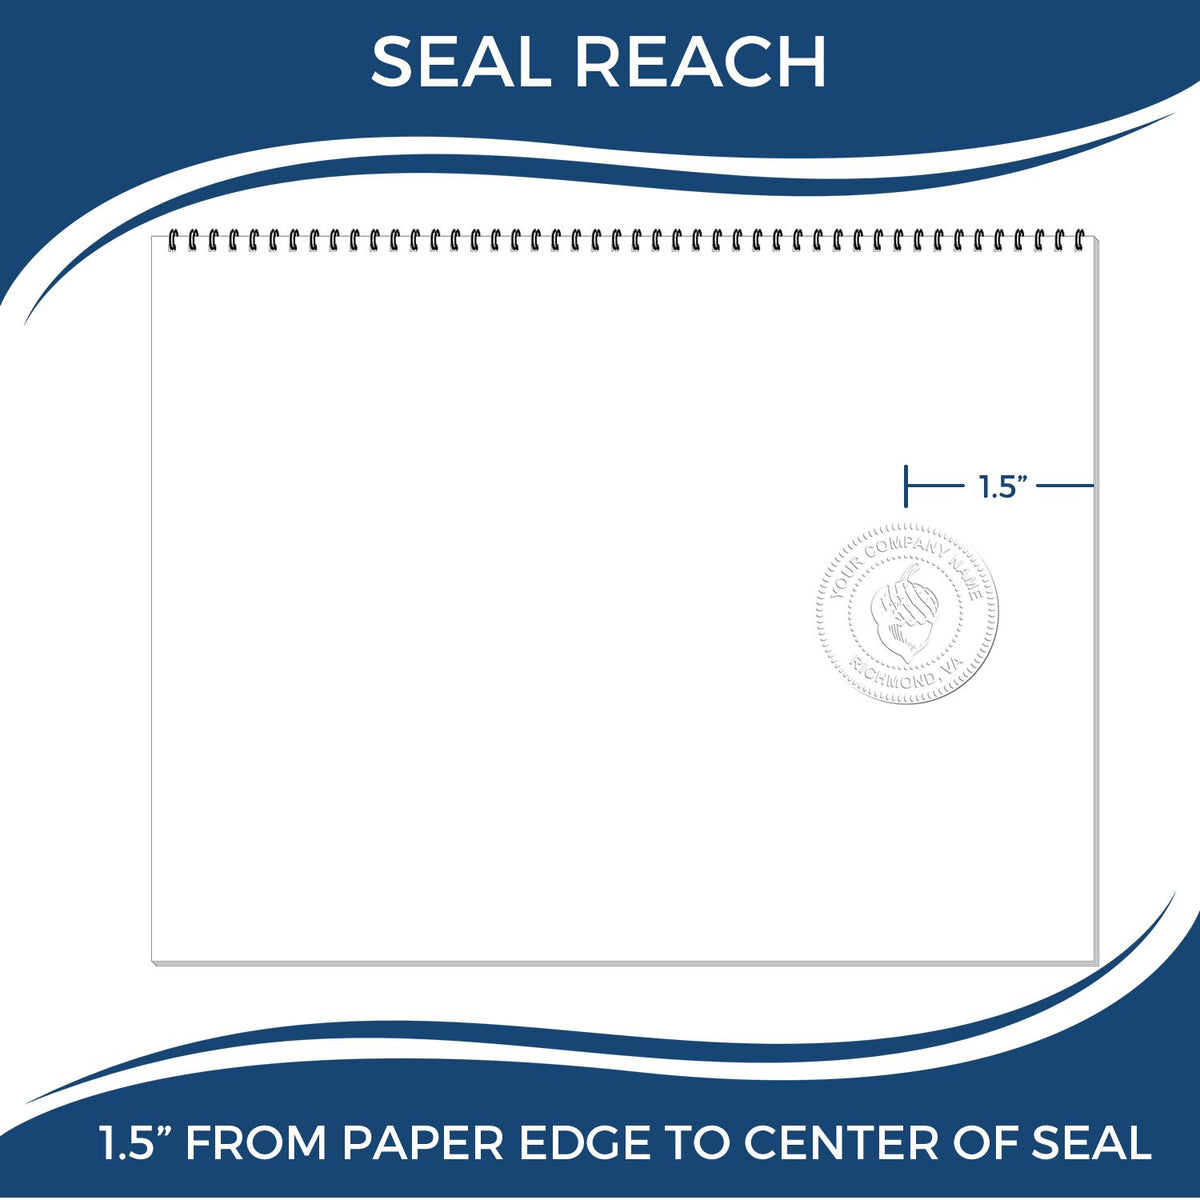 An infographic showing the seal reach which is represented by a ruler and a miniature seal image of the Gift Virginia Land Surveyor Seal